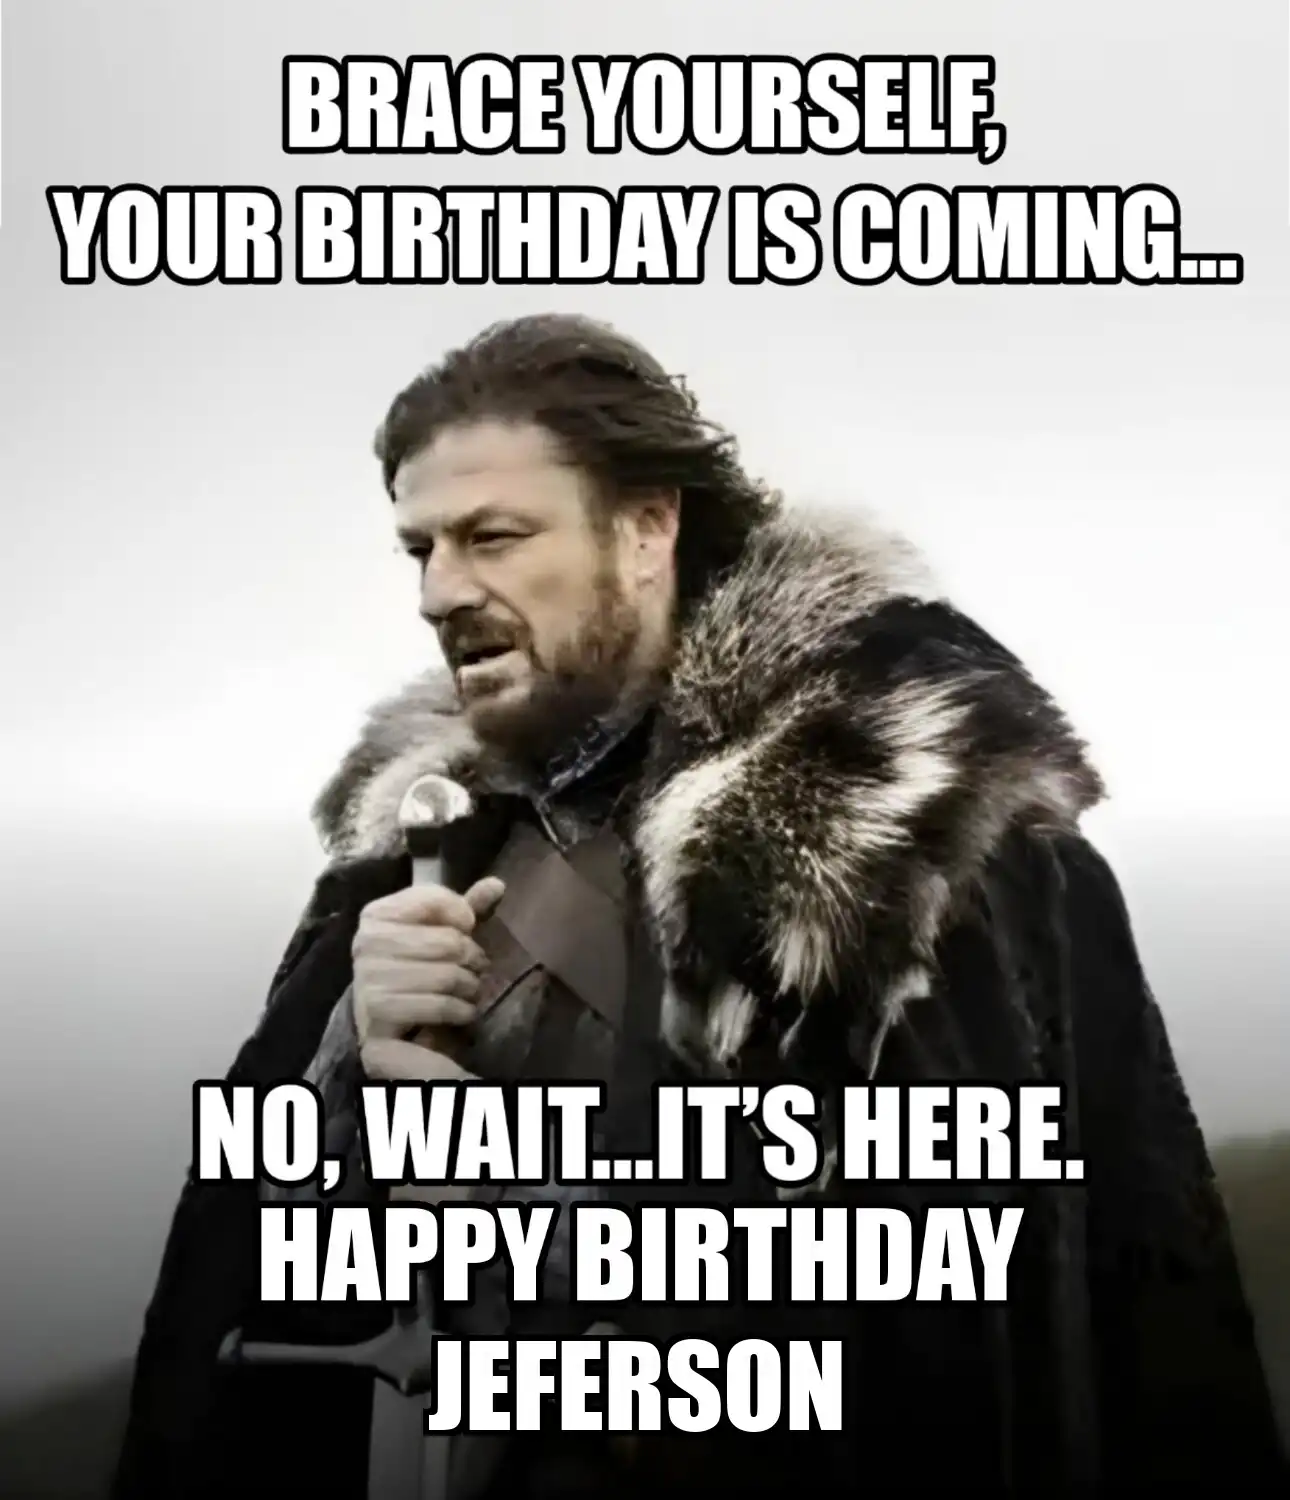 Happy Birthday Jeferson Brace Yourself Your Birthday Is Coming Meme